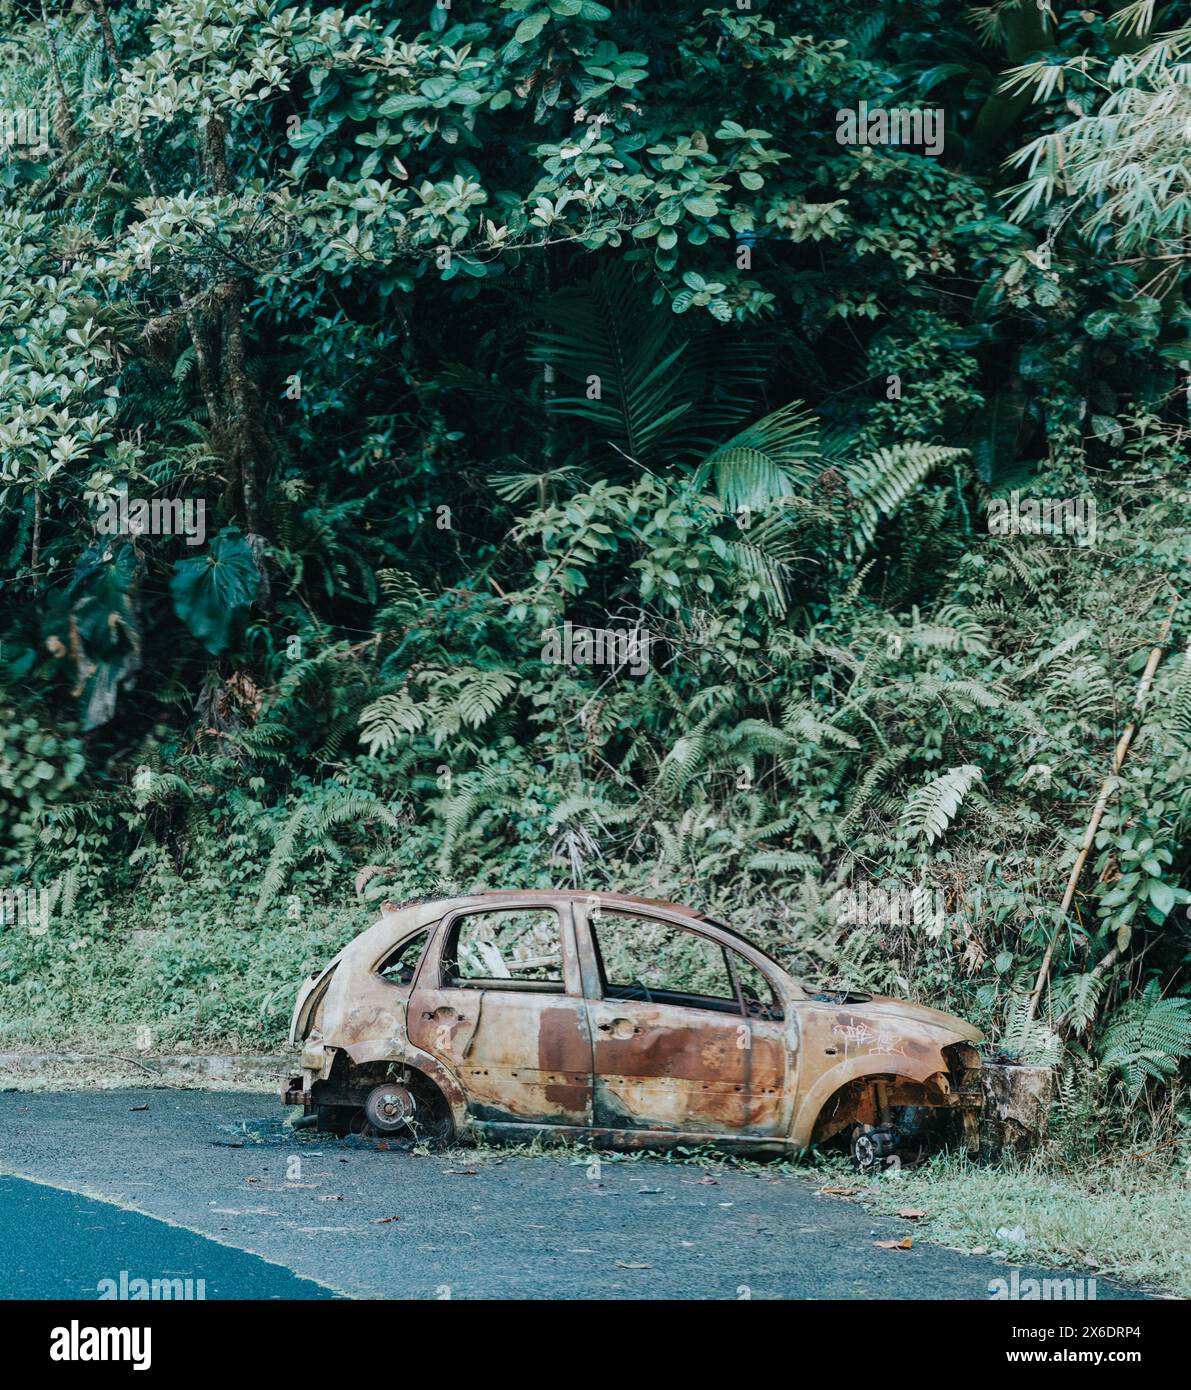 Rusty abandoned car surrounded by lush tropical vegetation on the roadside in Martinique, highlighting the contrast between nature and man-made object Stock Photo